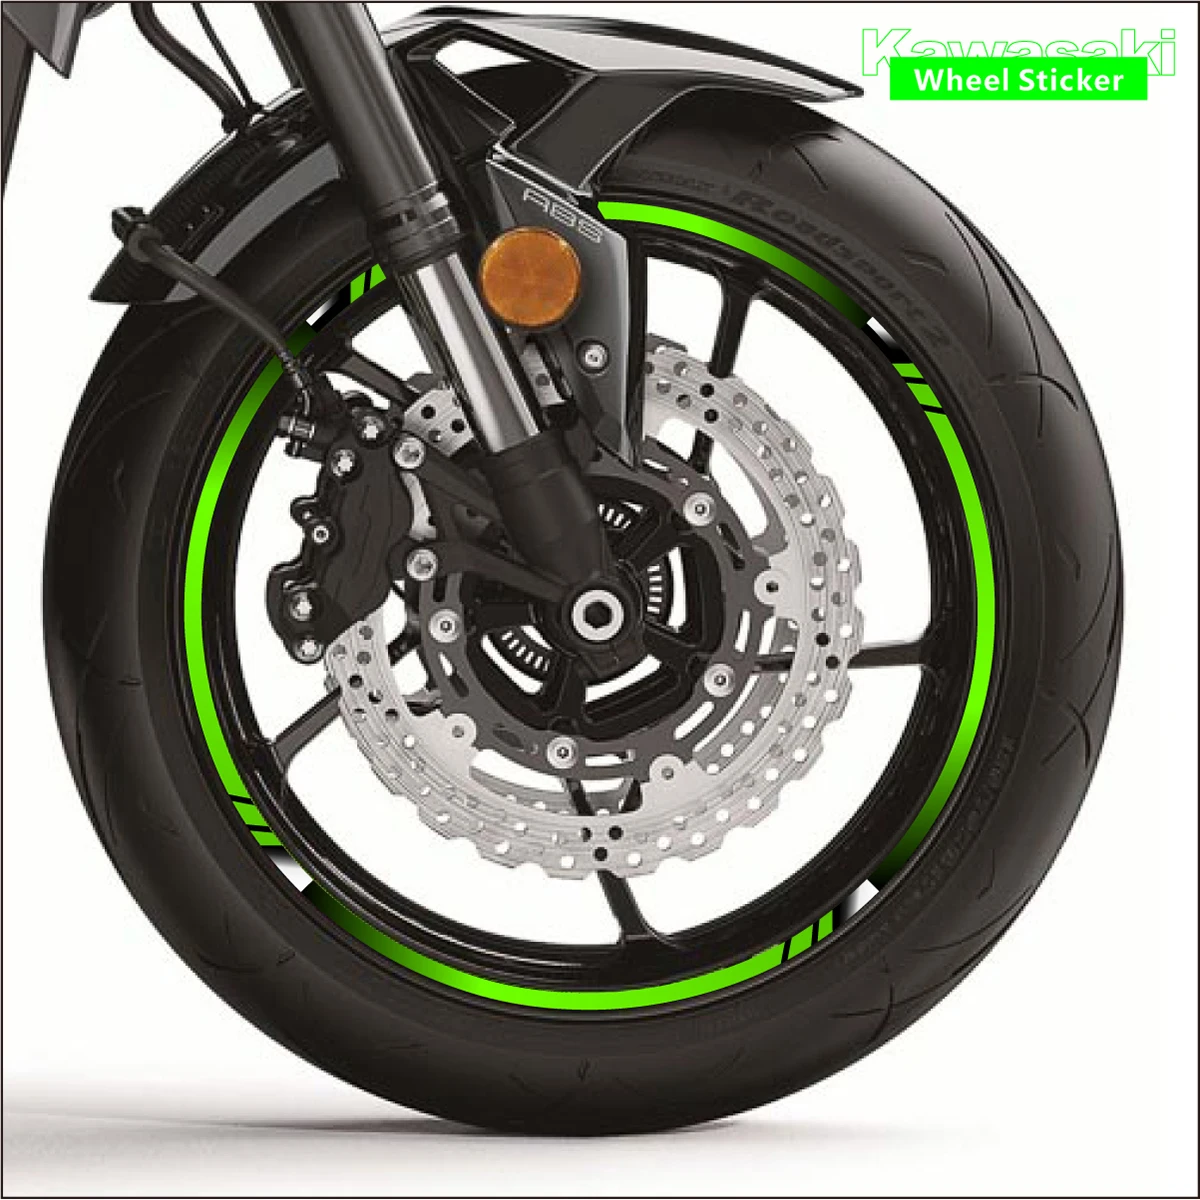 Motorcycle Wheel Stickers For Kawasaki z750 z800 z650 h2r z900 z1000 250sl Ninja 300 w800 Er6n z400 Zx6r Moto Rim Decals Sticker maisto 1 18 kawasaki h2 r ninja zx 10r 14r 9r z1000 static die cast vehicles collectible hobbies motorcycle model toys